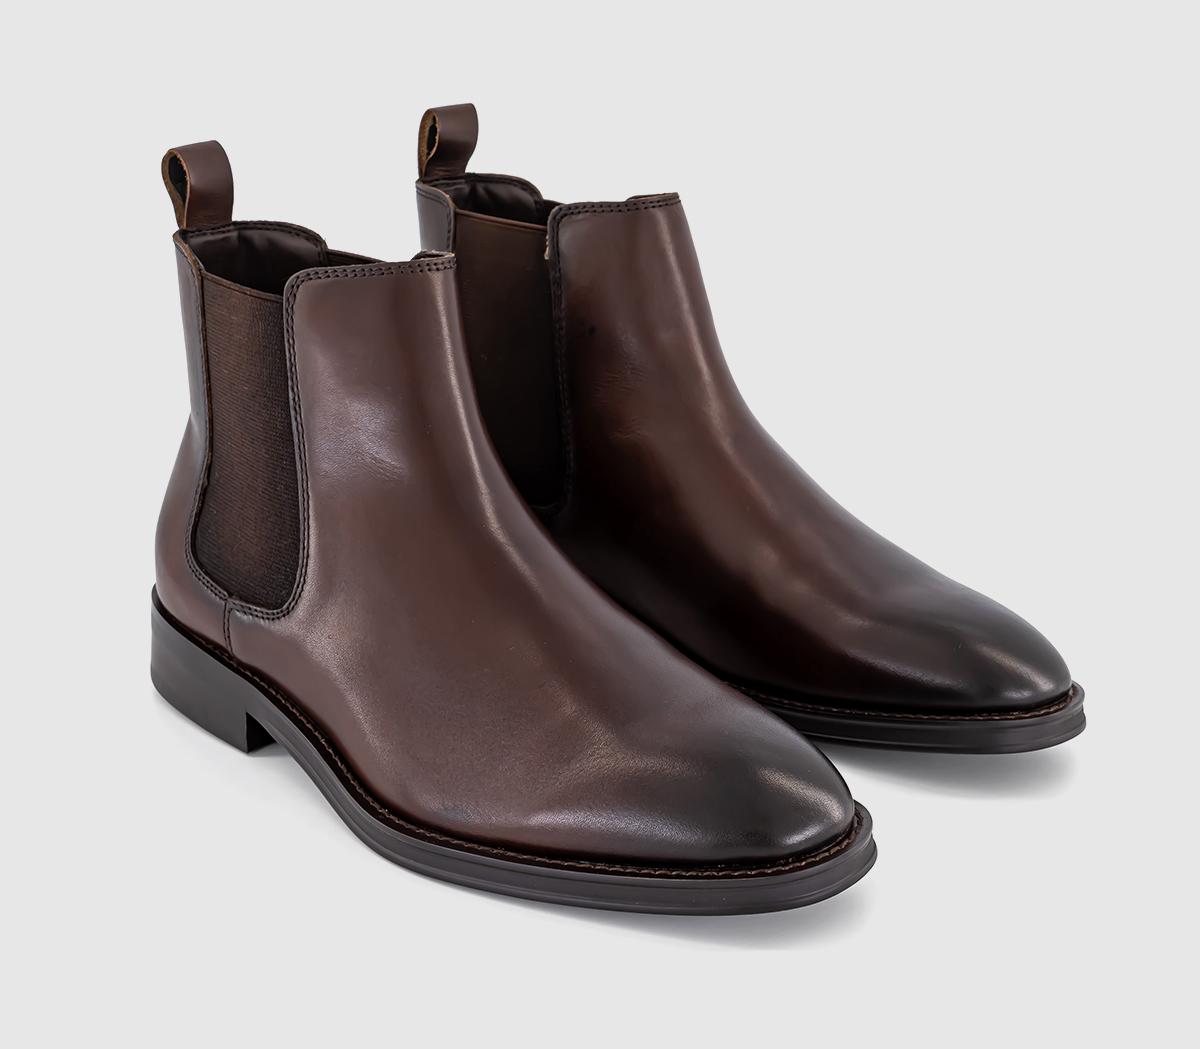 OFFICE Mens Blenheim Chelsea Boots Brown Leather, 6